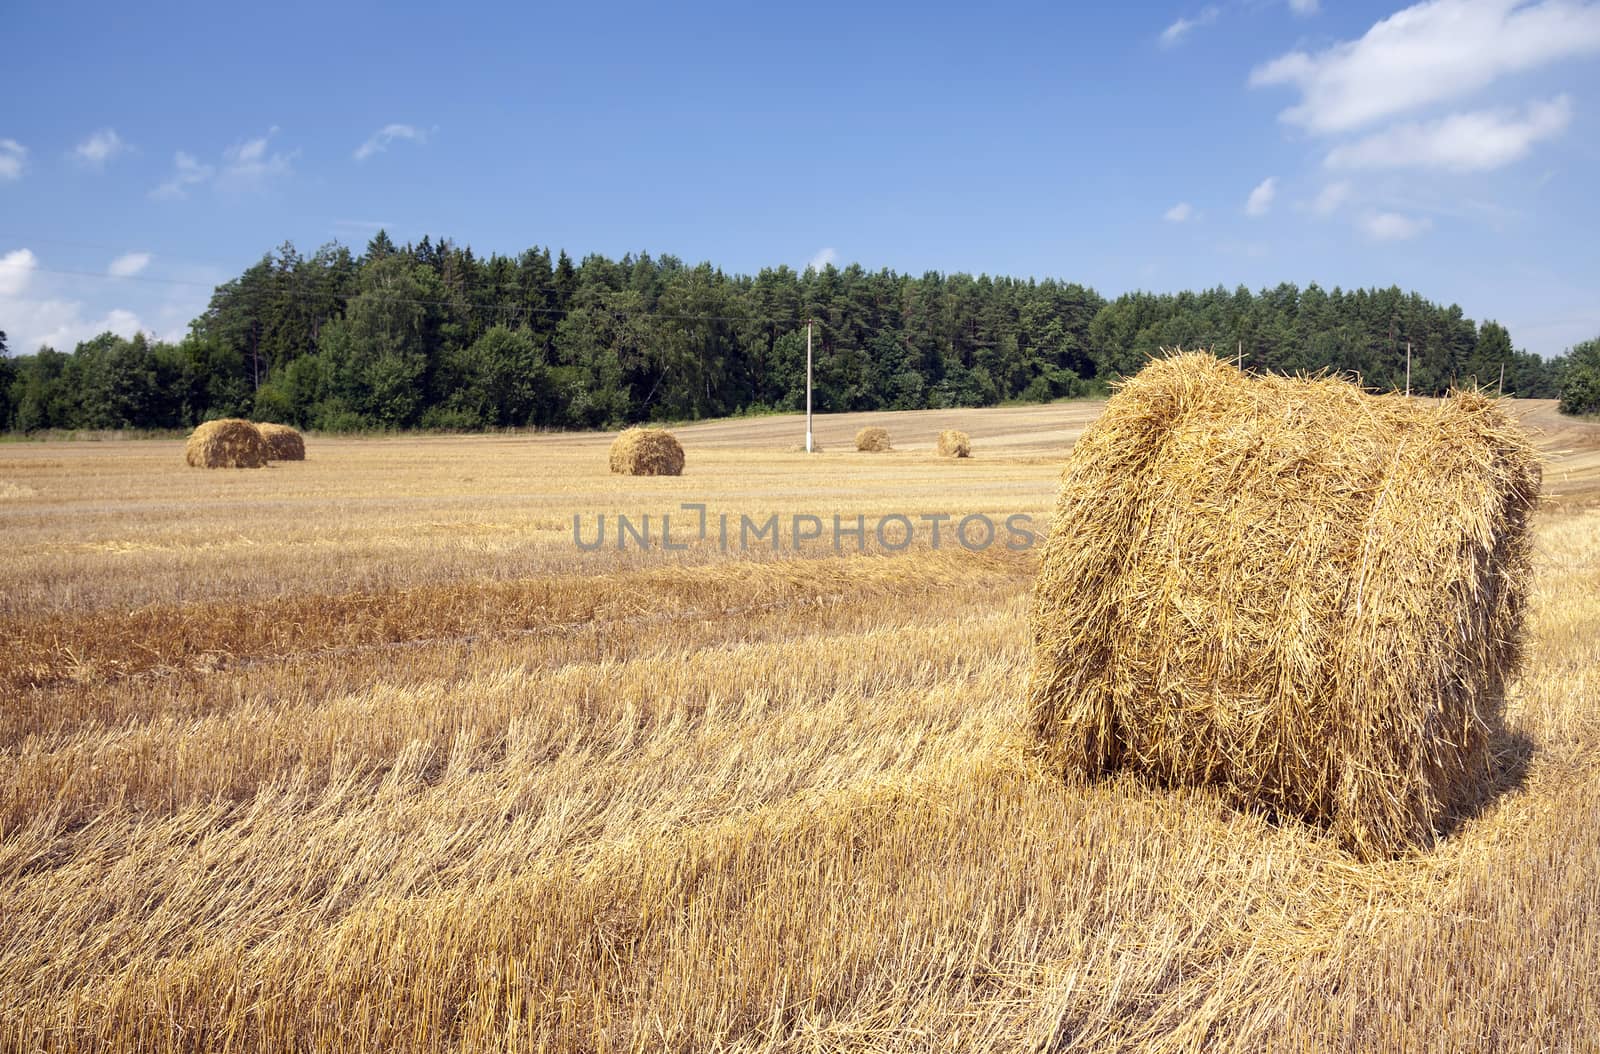 haystacks straw lying in the agricultural field after harvesting cereal